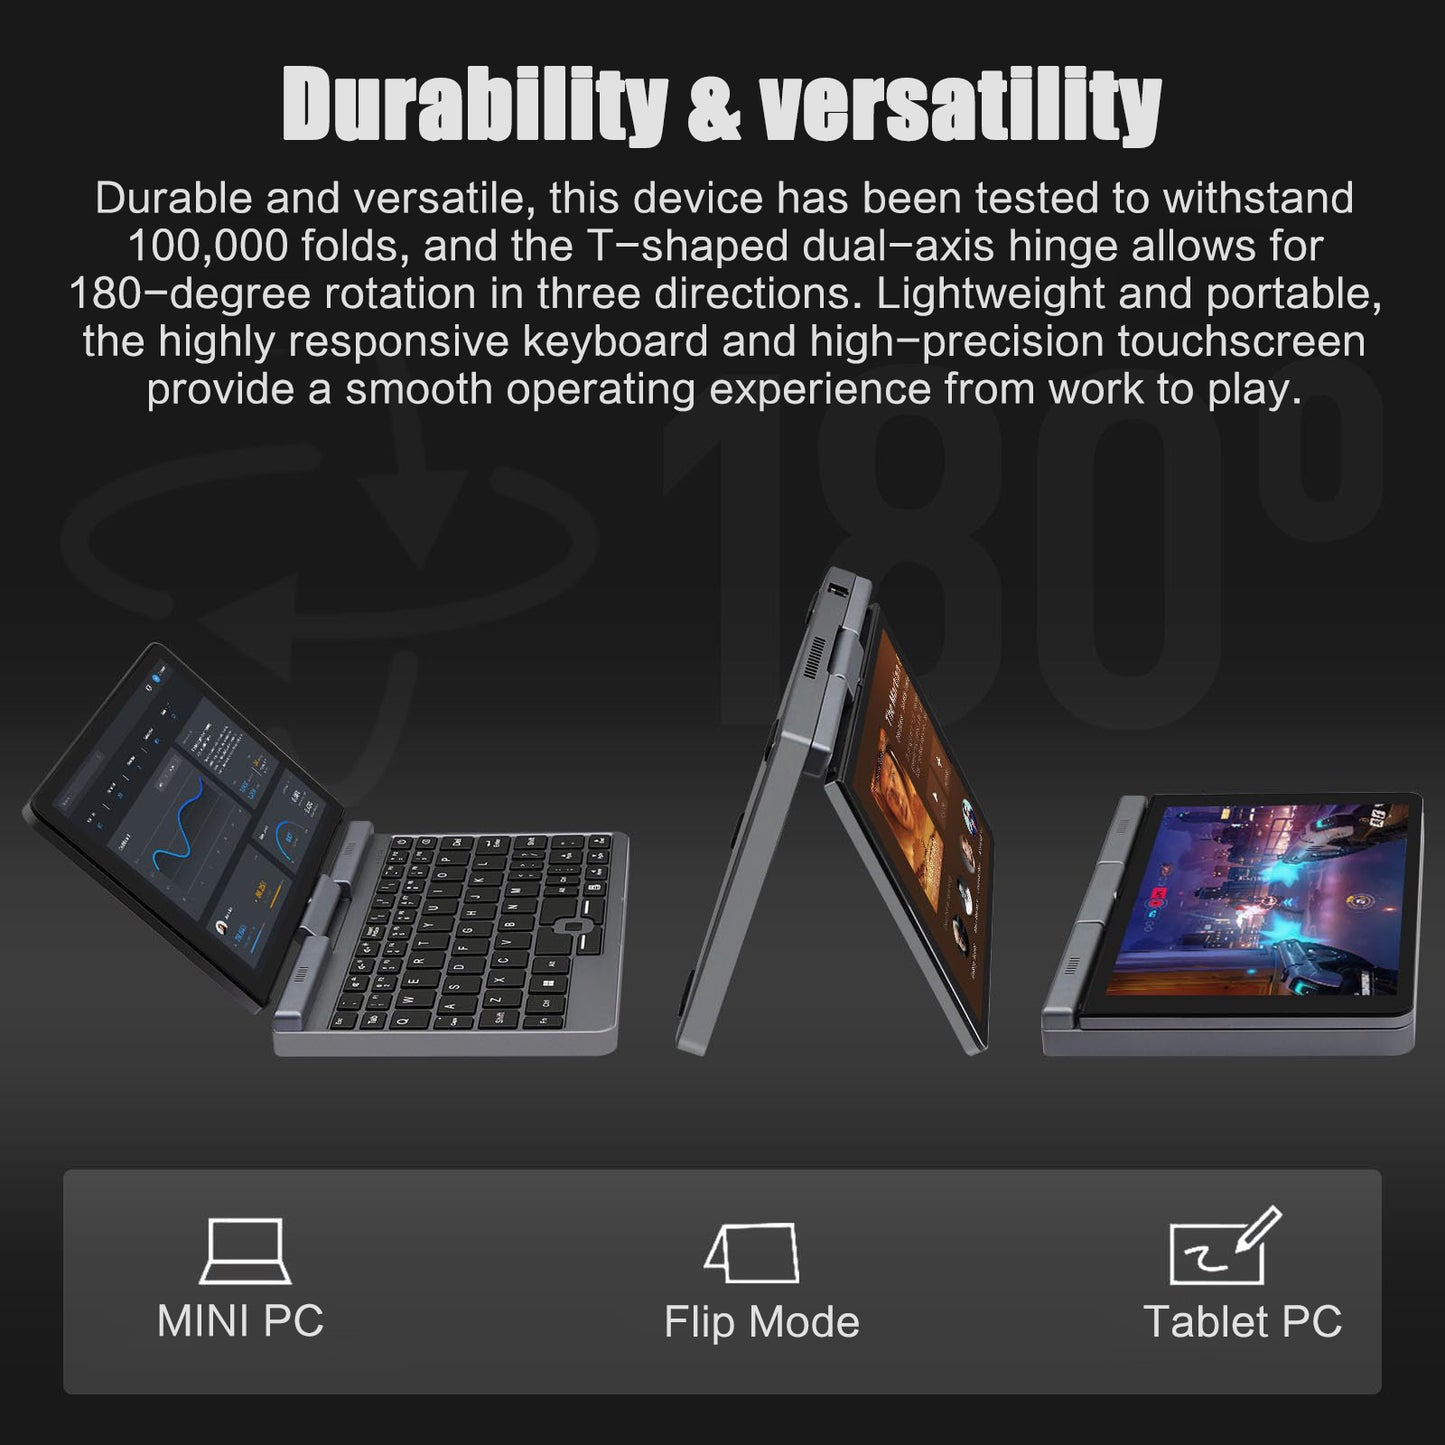 2-in-1 Compact Laptop, Pocket 8-inch Touchscreen Mobile PC, 2-Axis Hinge 180° Swivel, 780g, Alder Lake-N100, 12GB DDR5 RAM, [Windows 11 Office 2019] with Touch Pen Support Smartphone Games